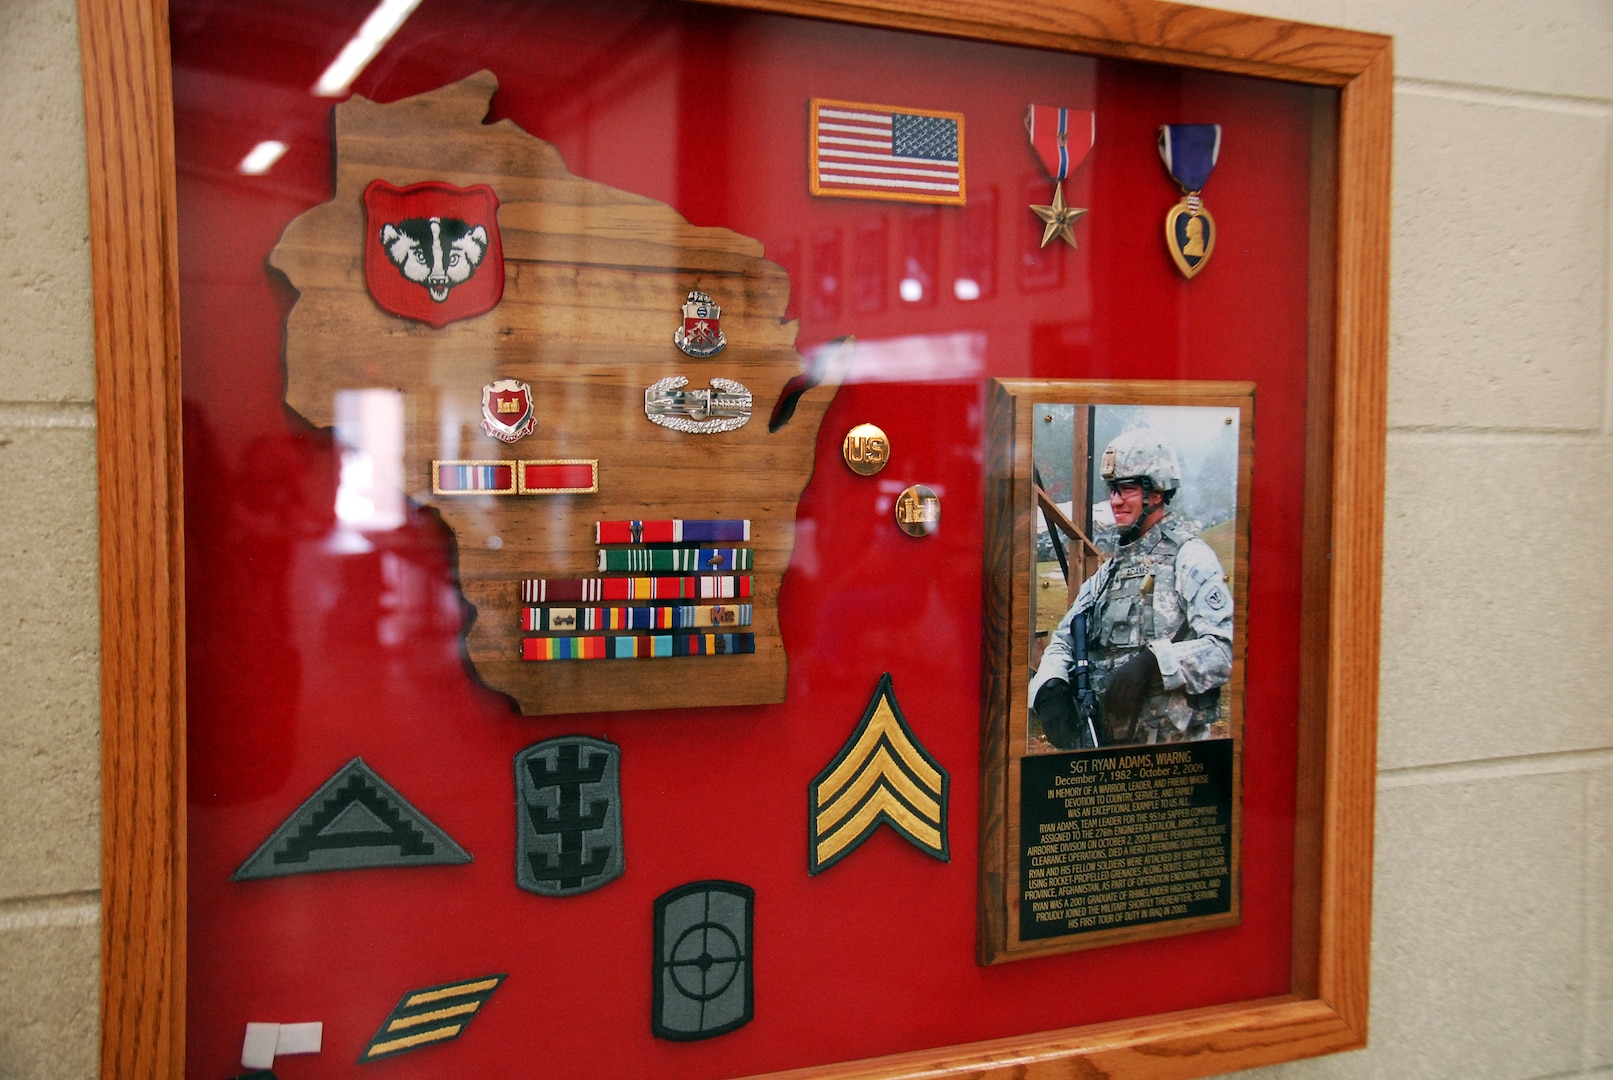 A shadow box dedicated to Sgt. Ryan Adams hangs on a wall in the Army National Guard armory in Rhinelander, Wis., with Adams’ picture and awards. The display serves as a remembrance of his service and sacrifice for fellow Soldiers.